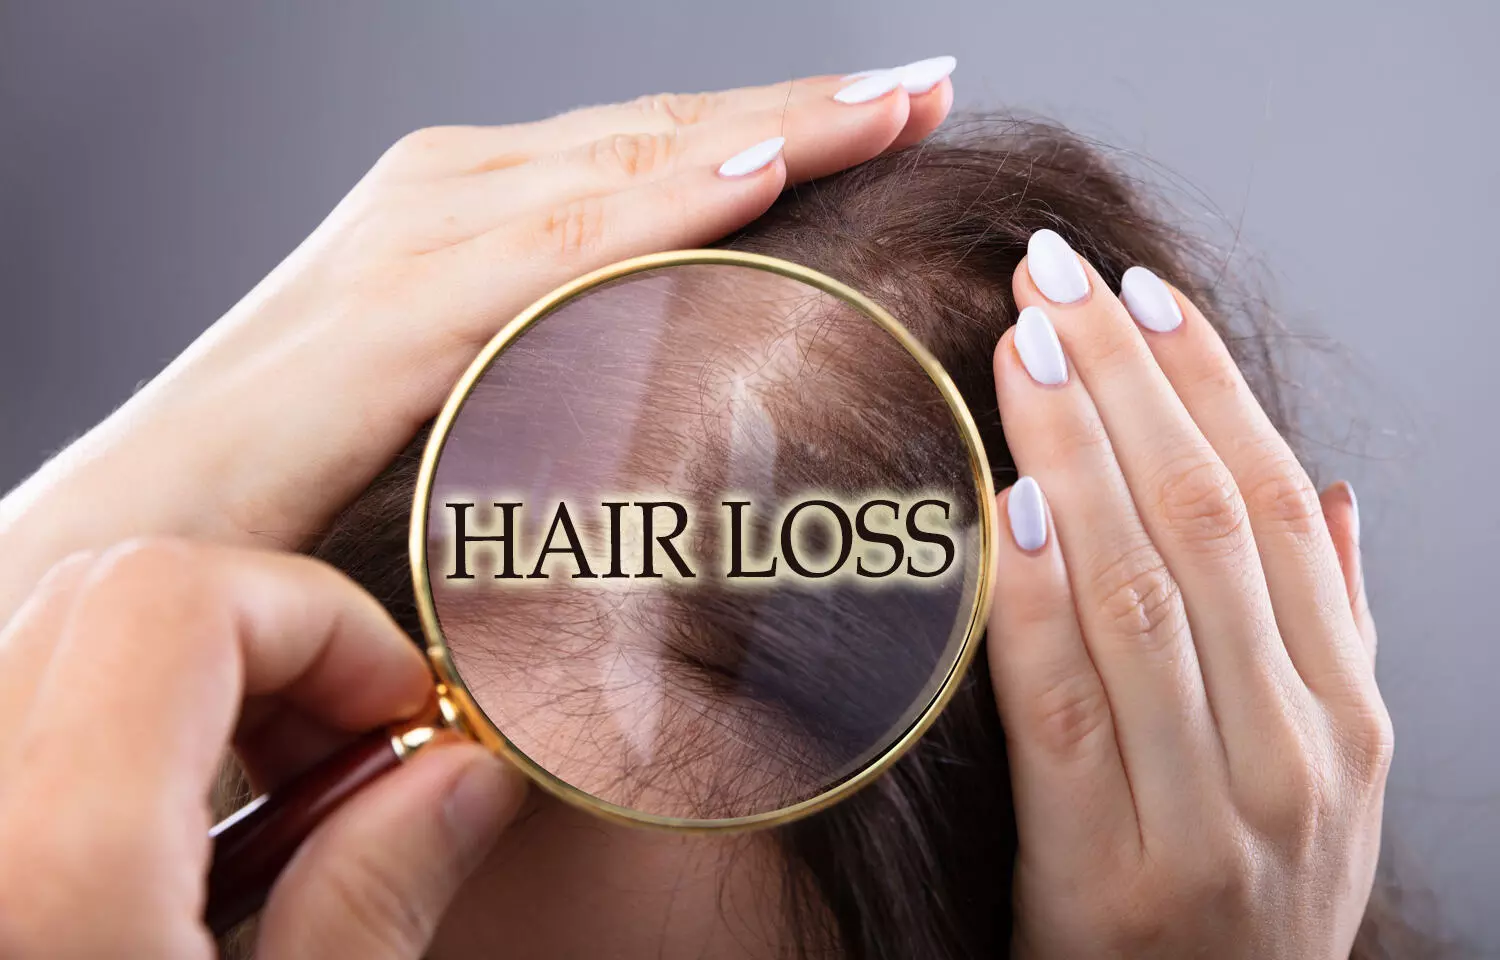 How chronic stress leads to hair loss, finds study